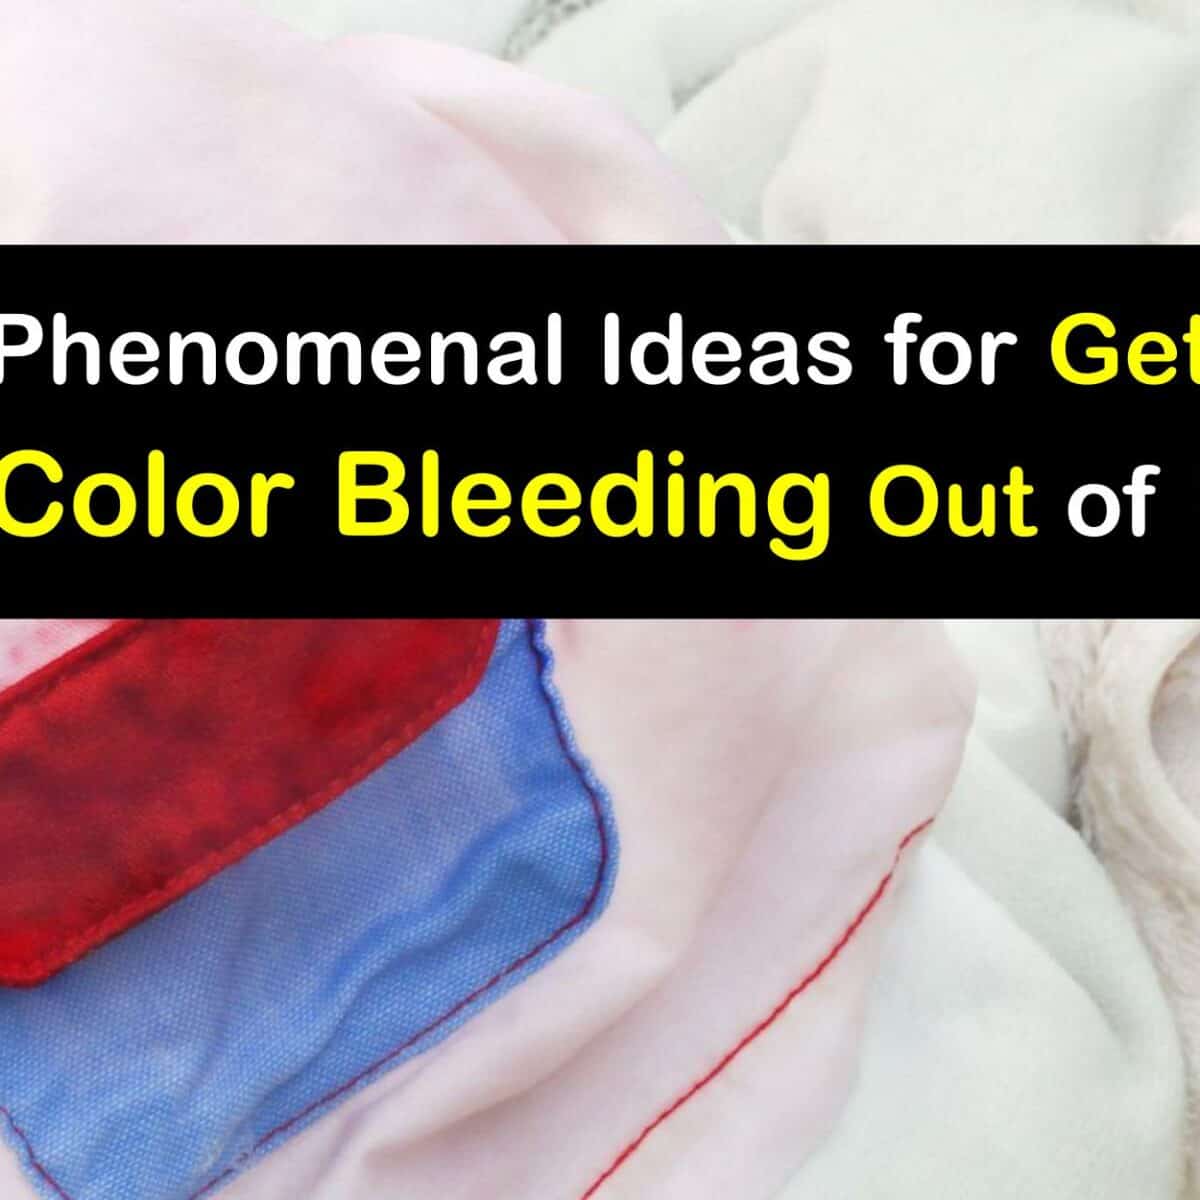 https://www.tipsbulletin.com/wp-content/uploads/2022/12/GoogleDrive_how-to-get-color-bleeding-out-of-clothes-t1-1200x1200-cropped.jpg